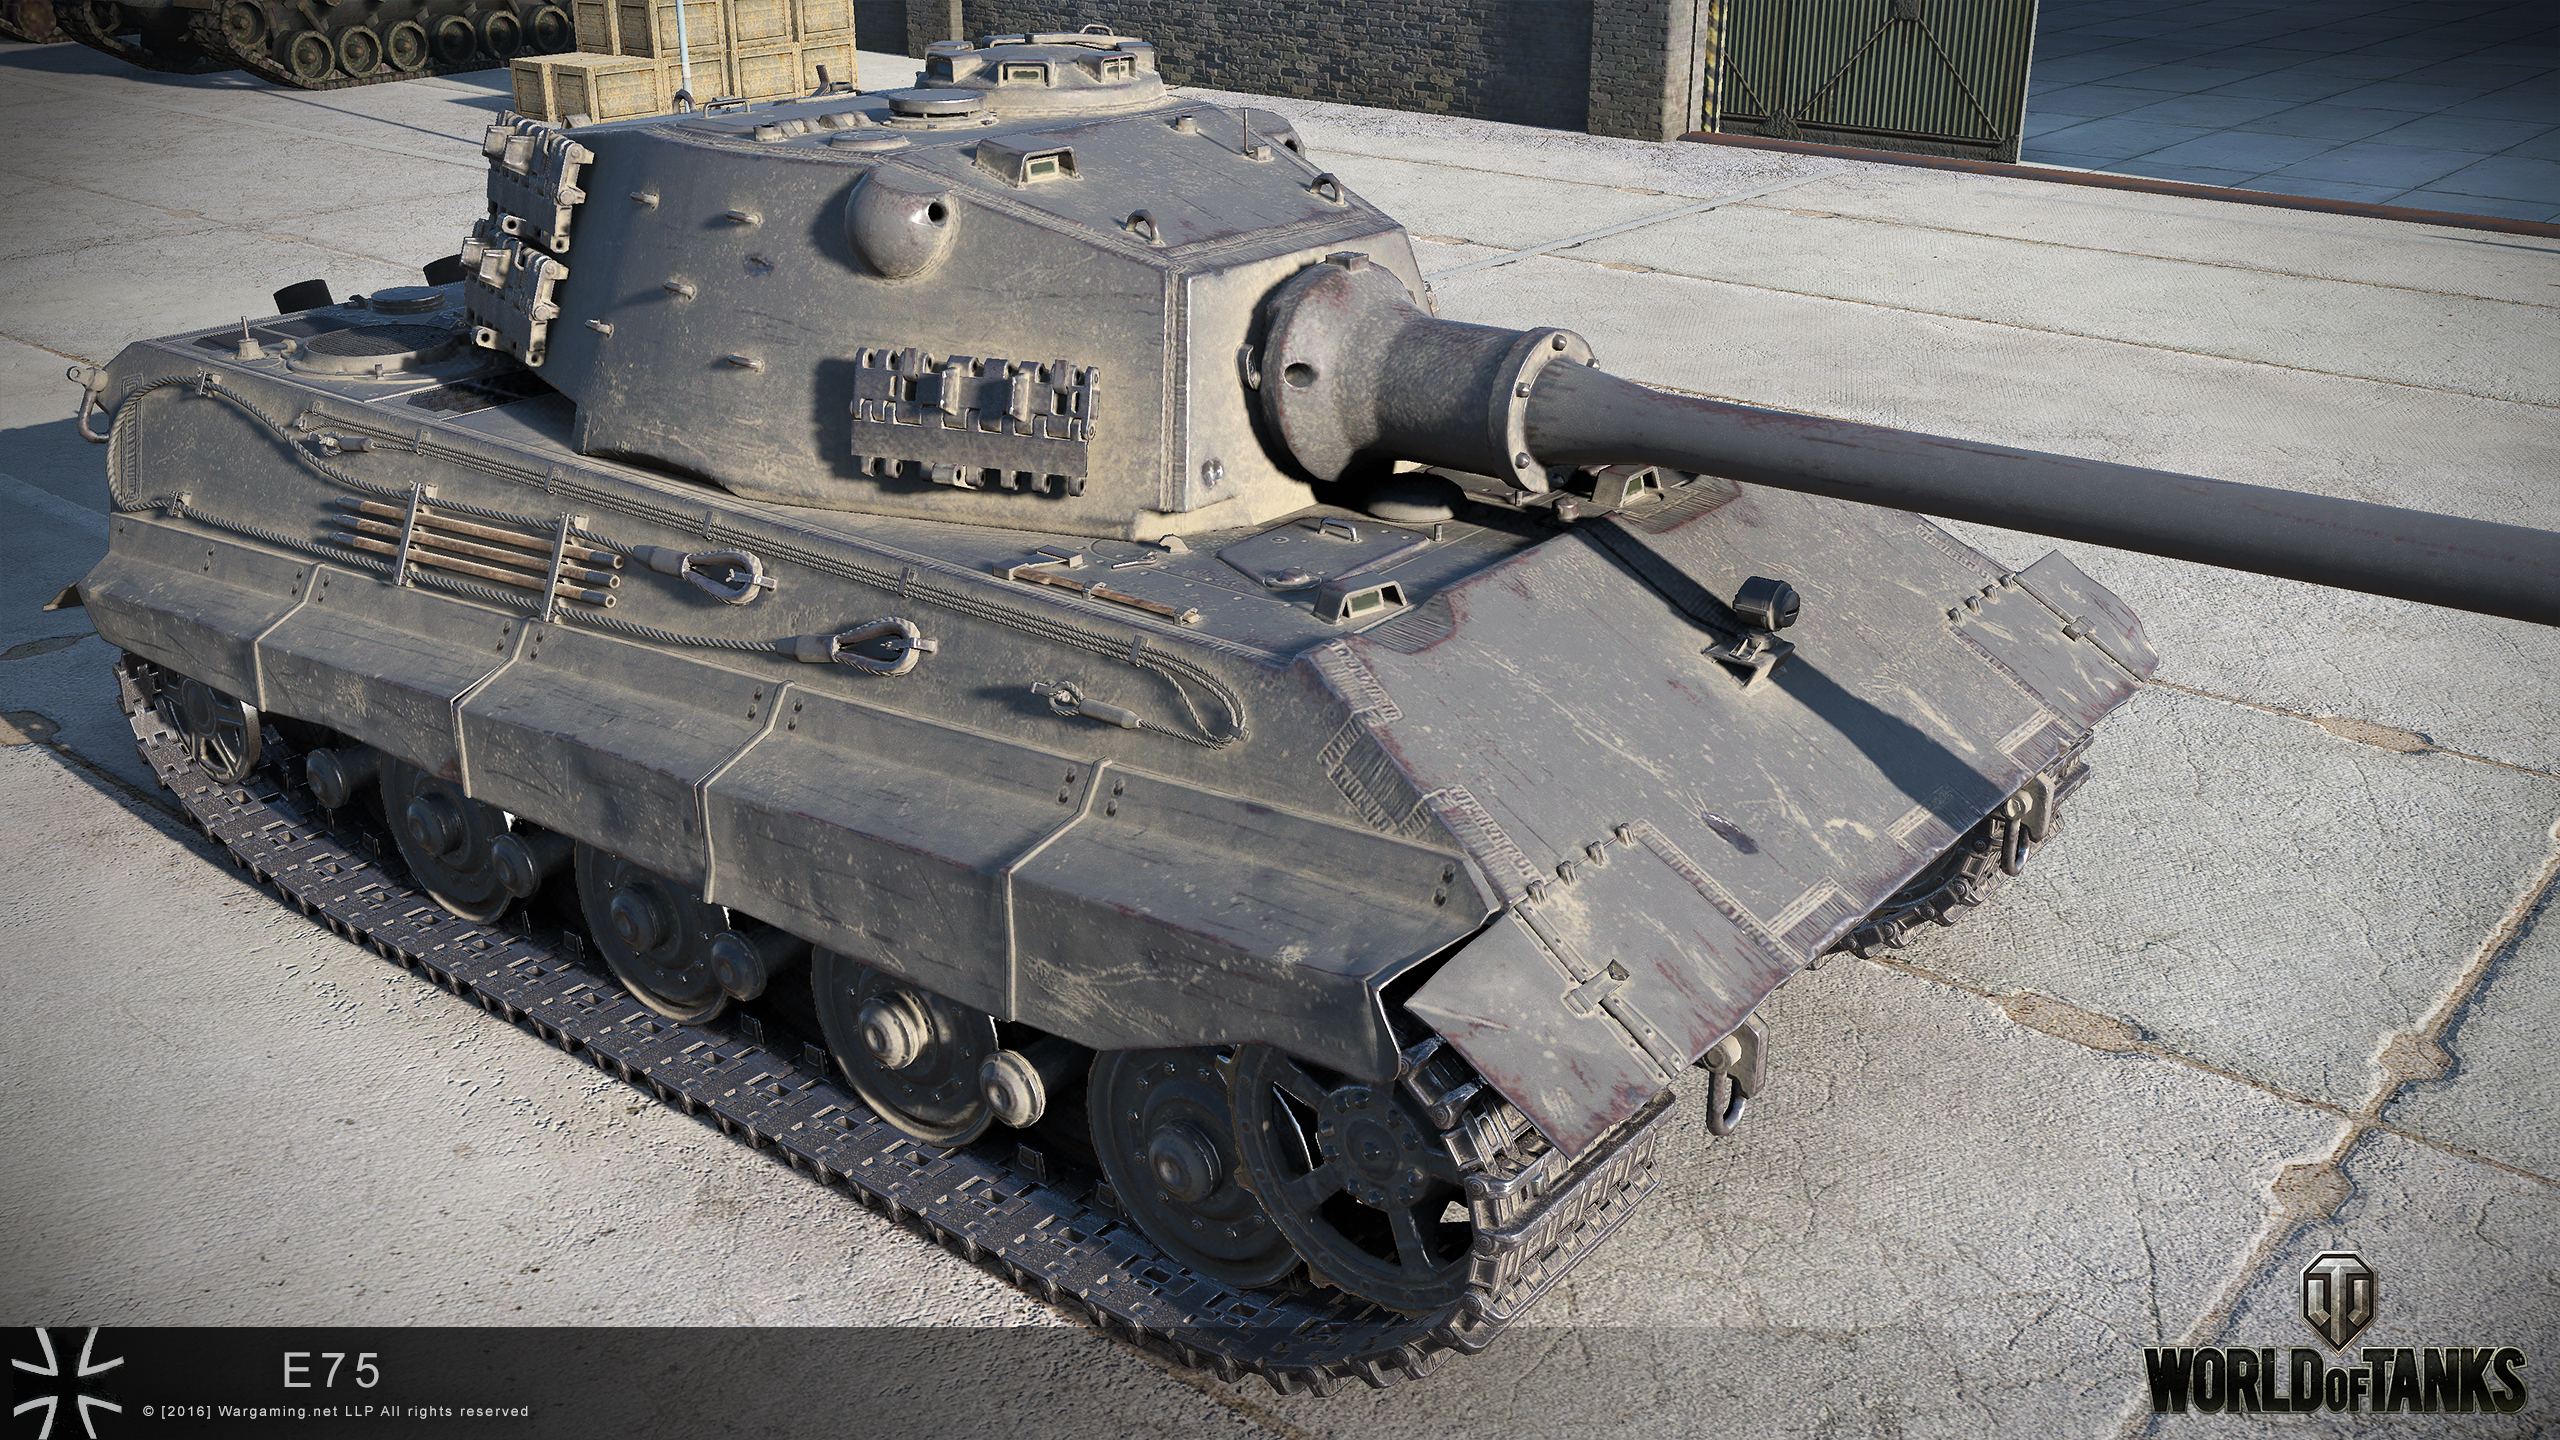 World Of Tanks 0 9 15 1 E75 Dicker Max And Hetzer Hd Official Pictures Mmowg Net